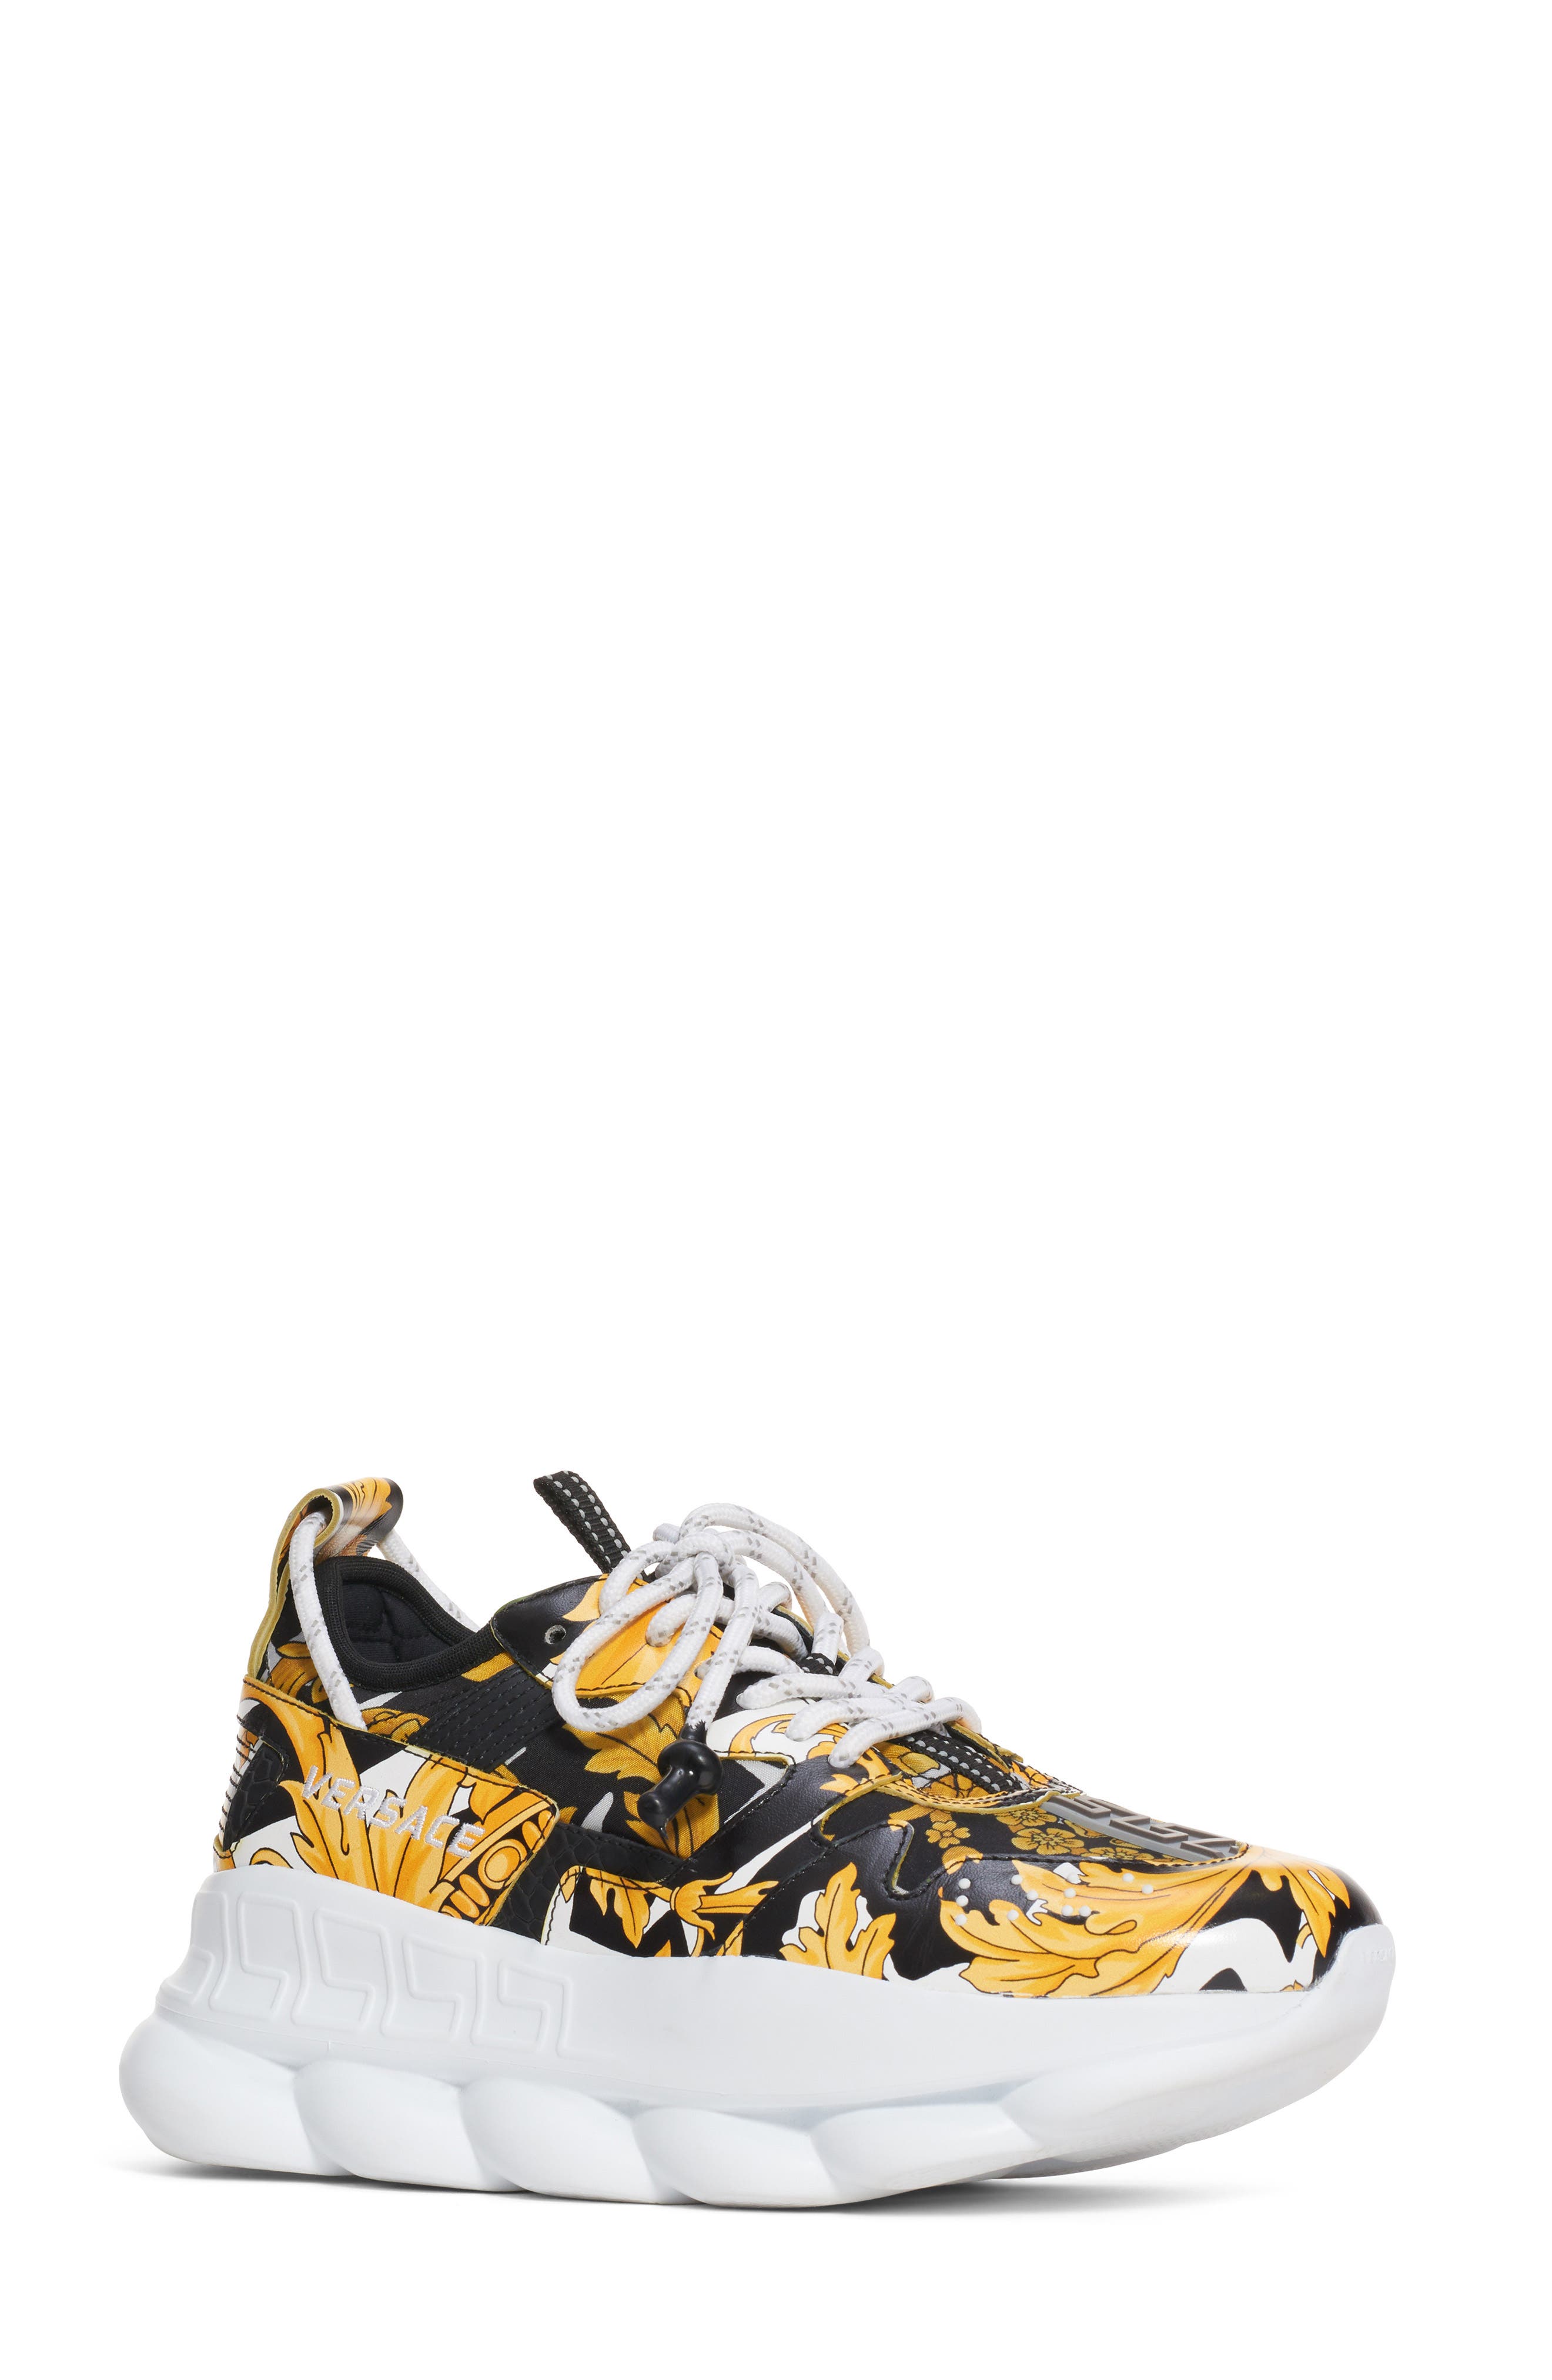 versace shoes womens sneakers - 63% OFF 